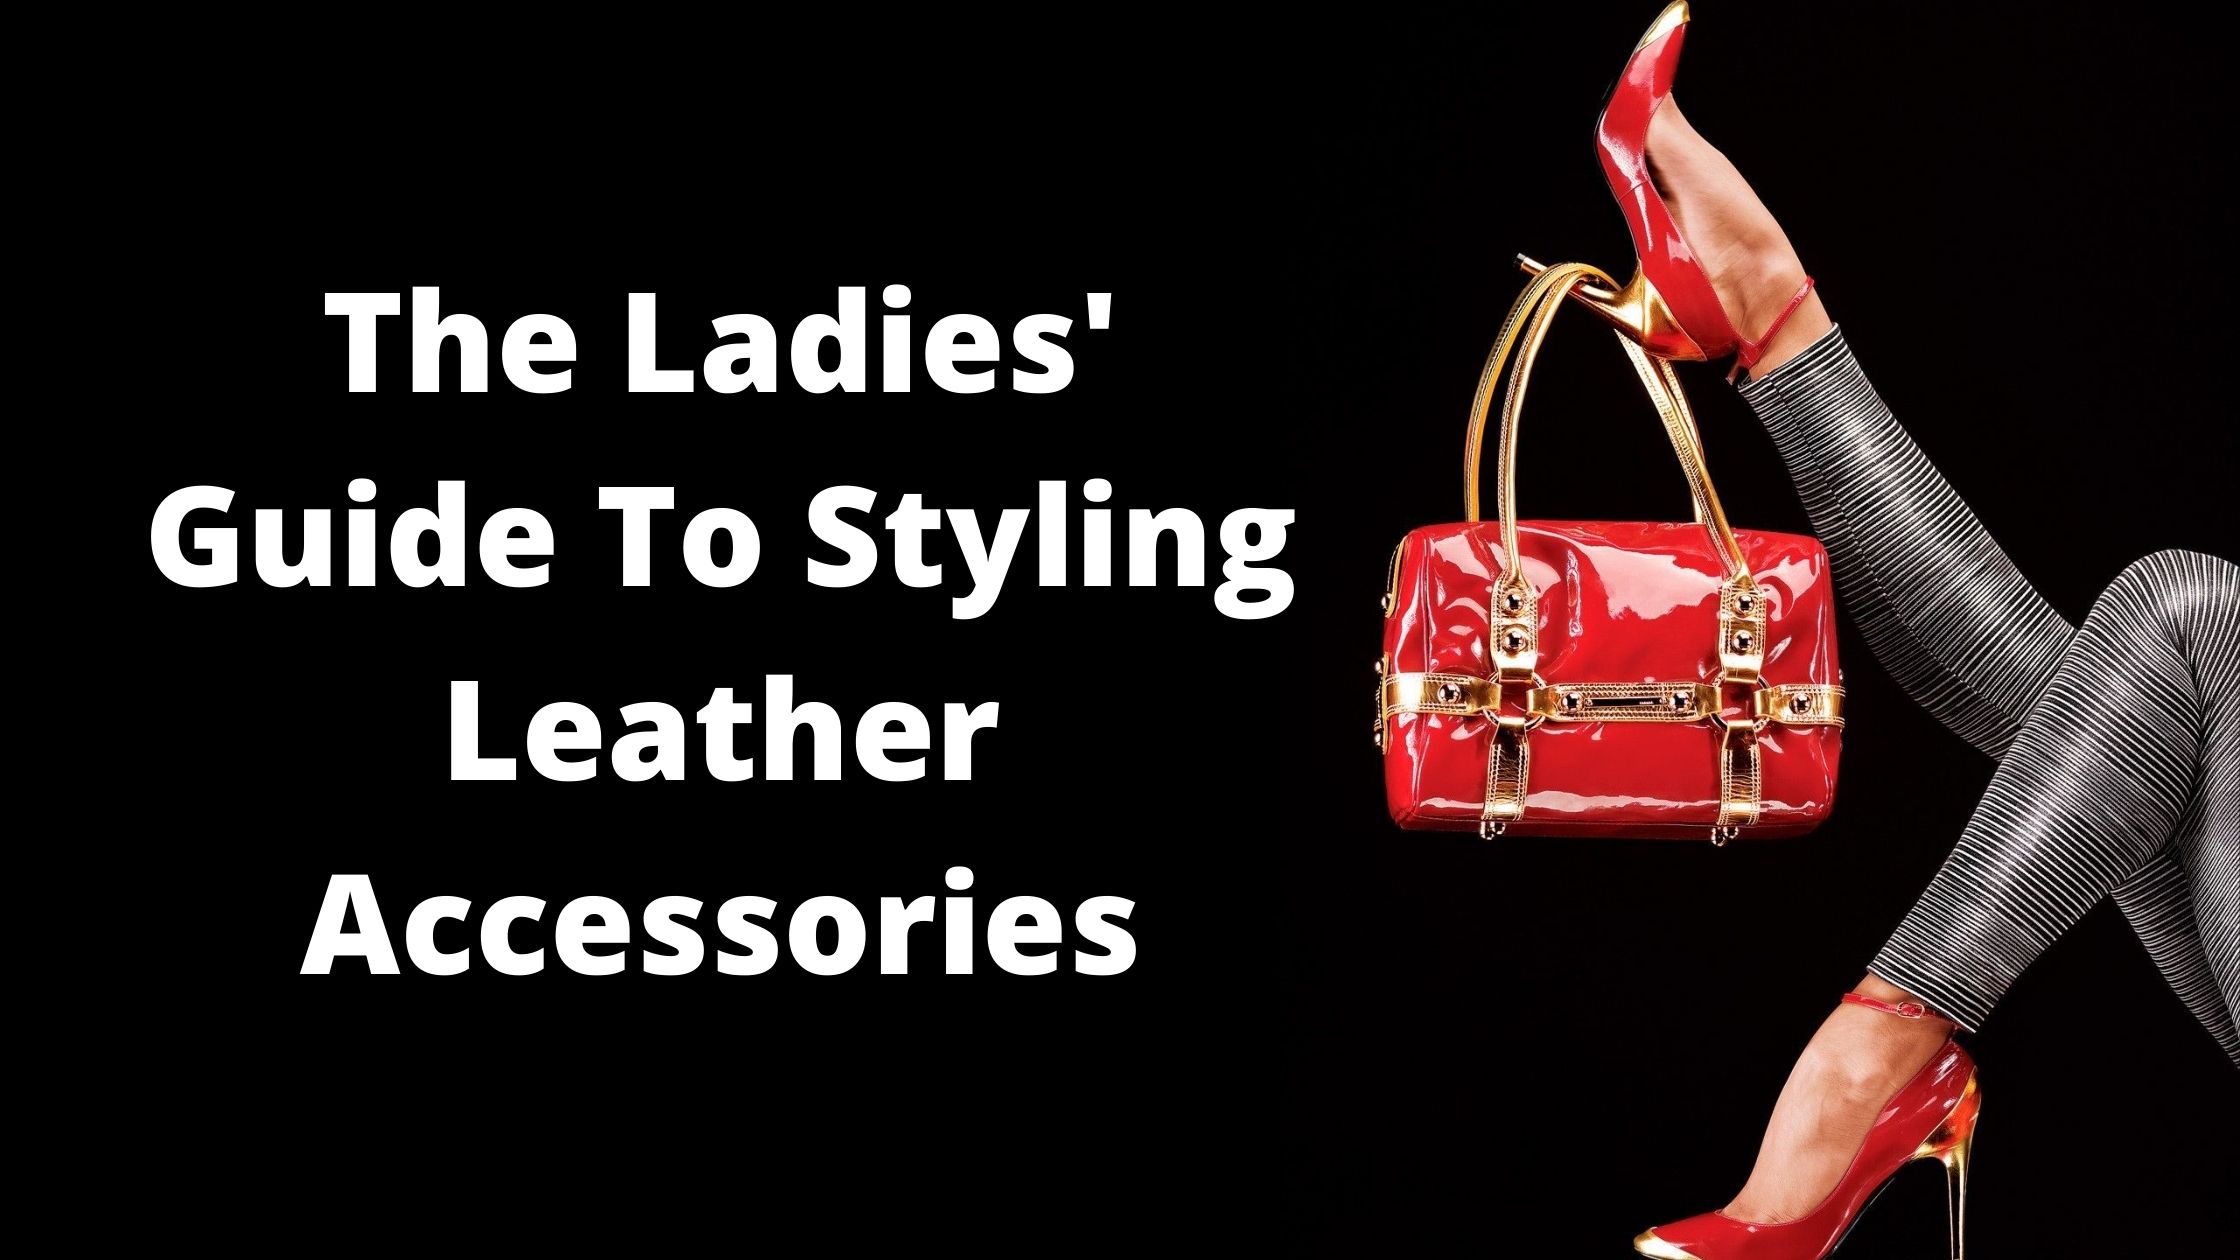 You are currently viewing The Ladies’ Guide To Styling Leather Accessories